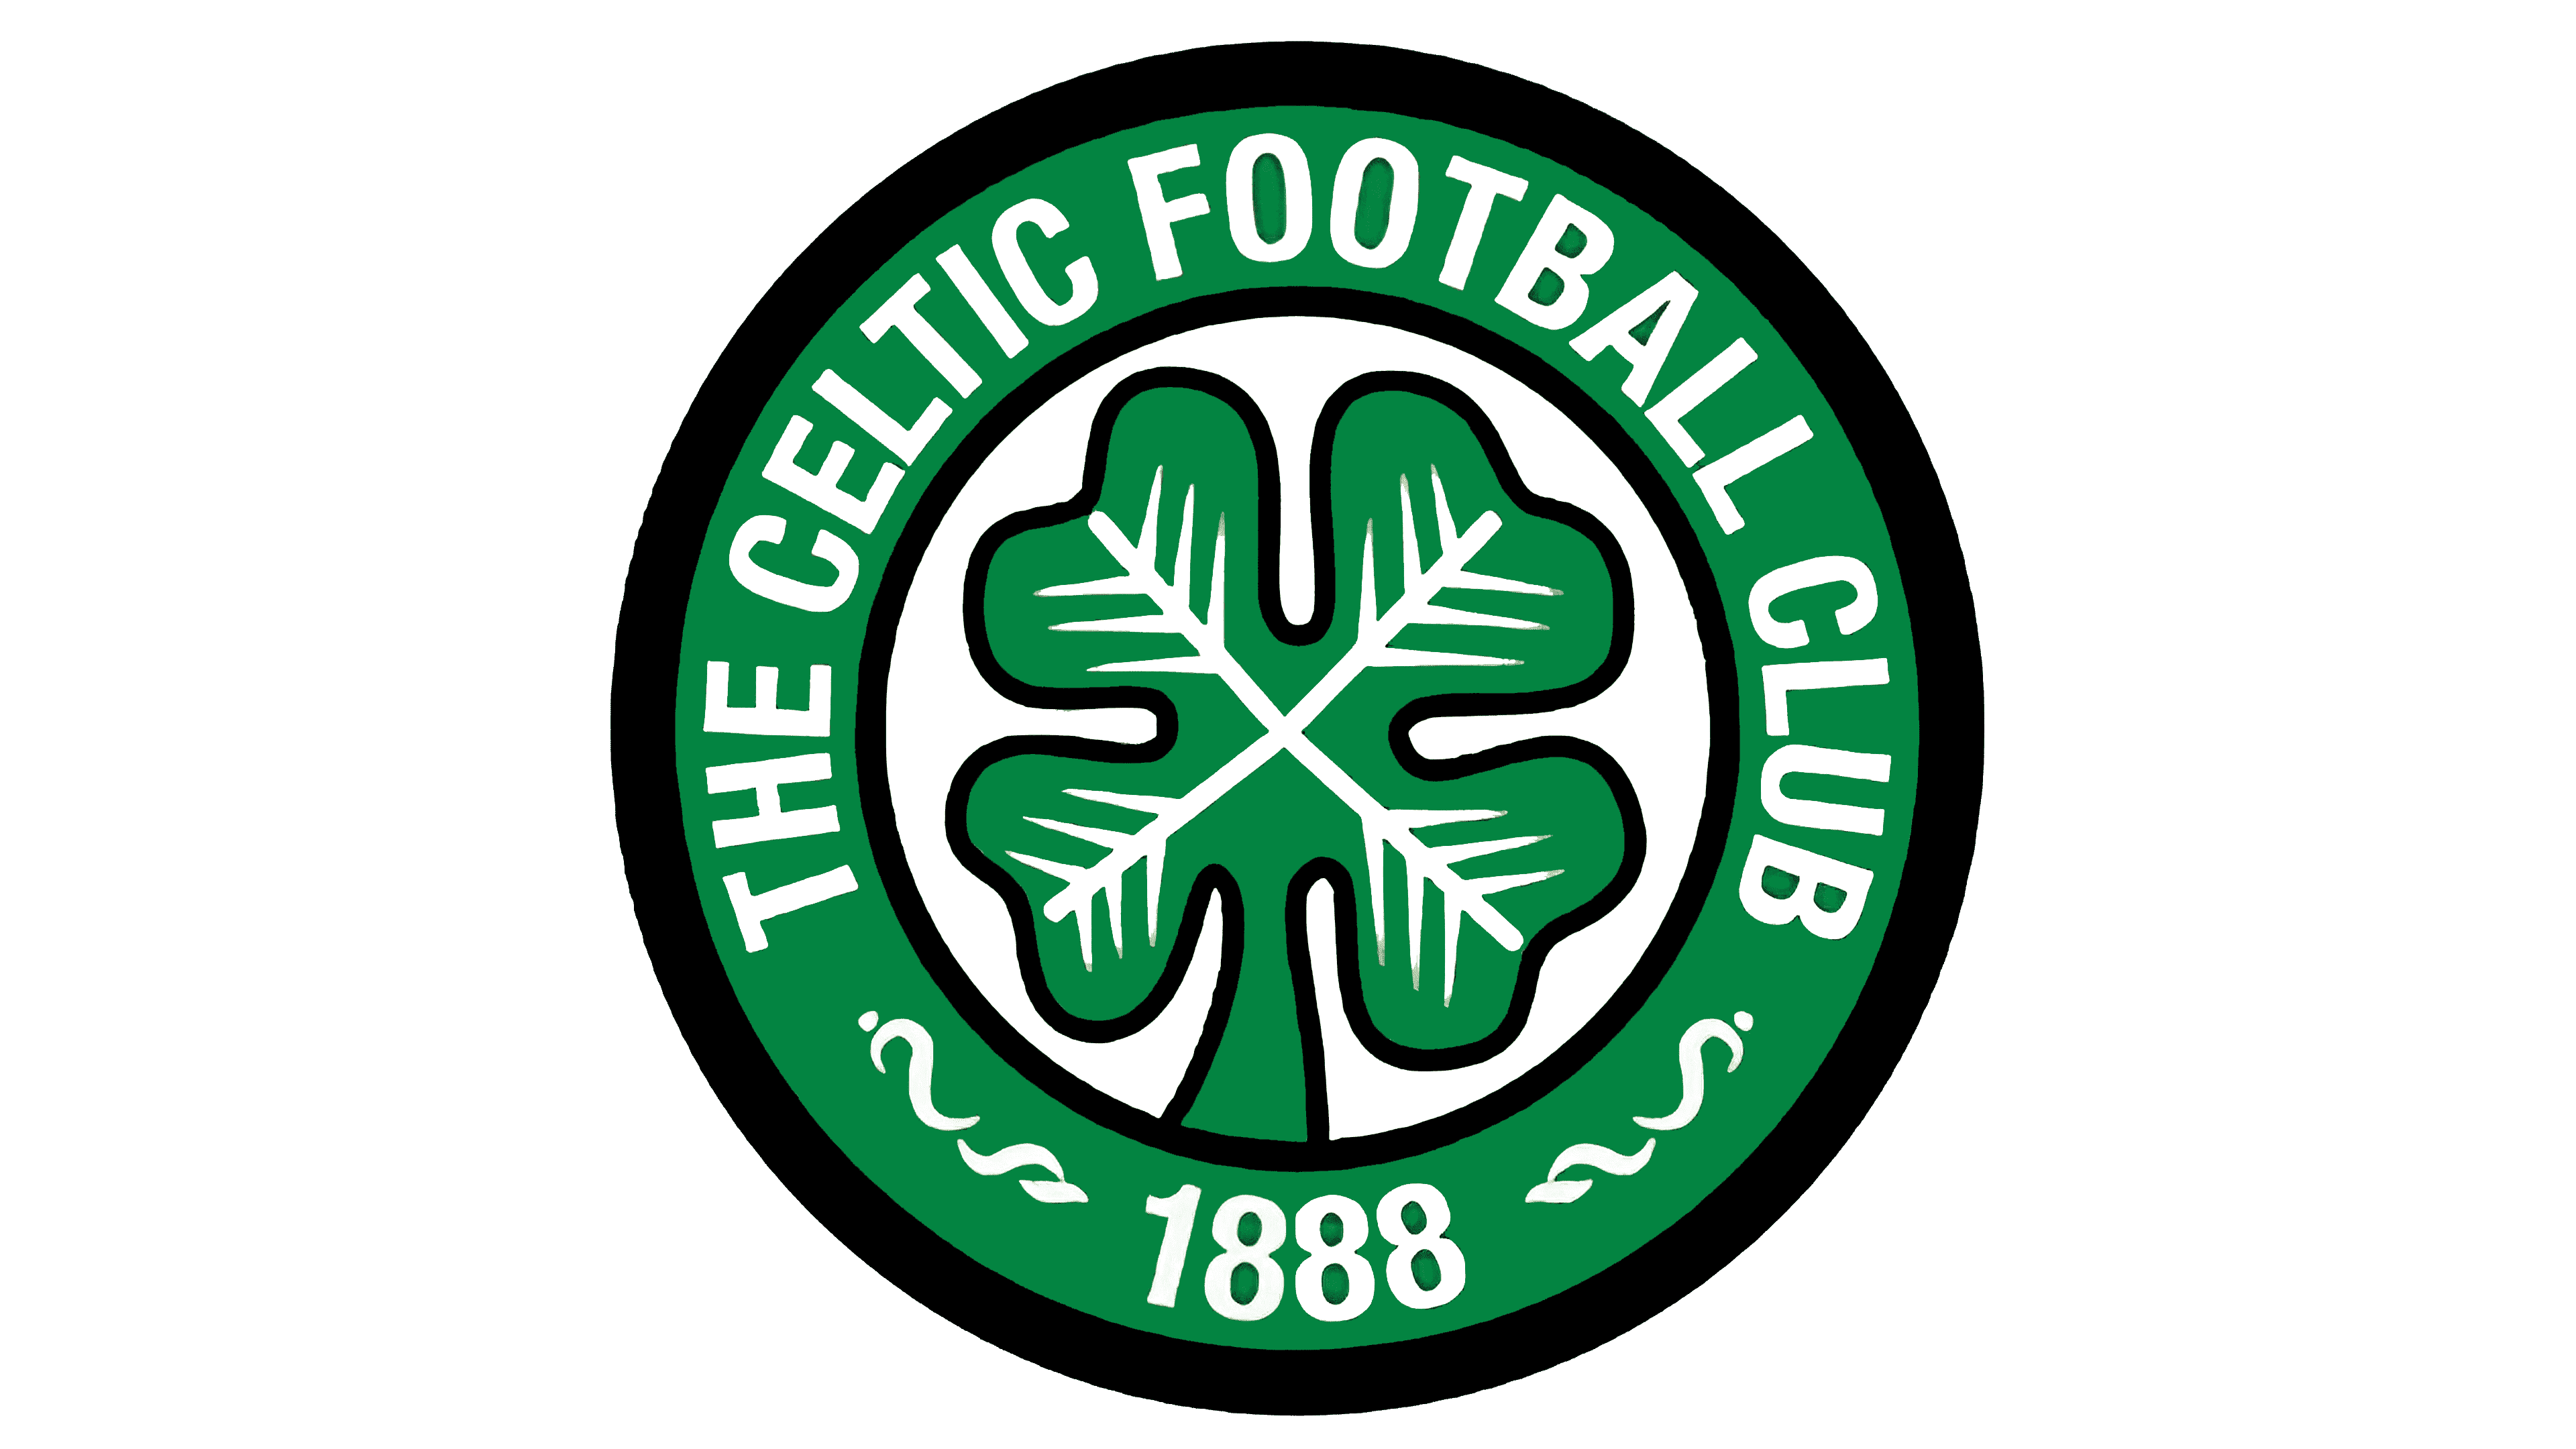 Celtic's badge: An element of mystery but a symbol of club's Irish